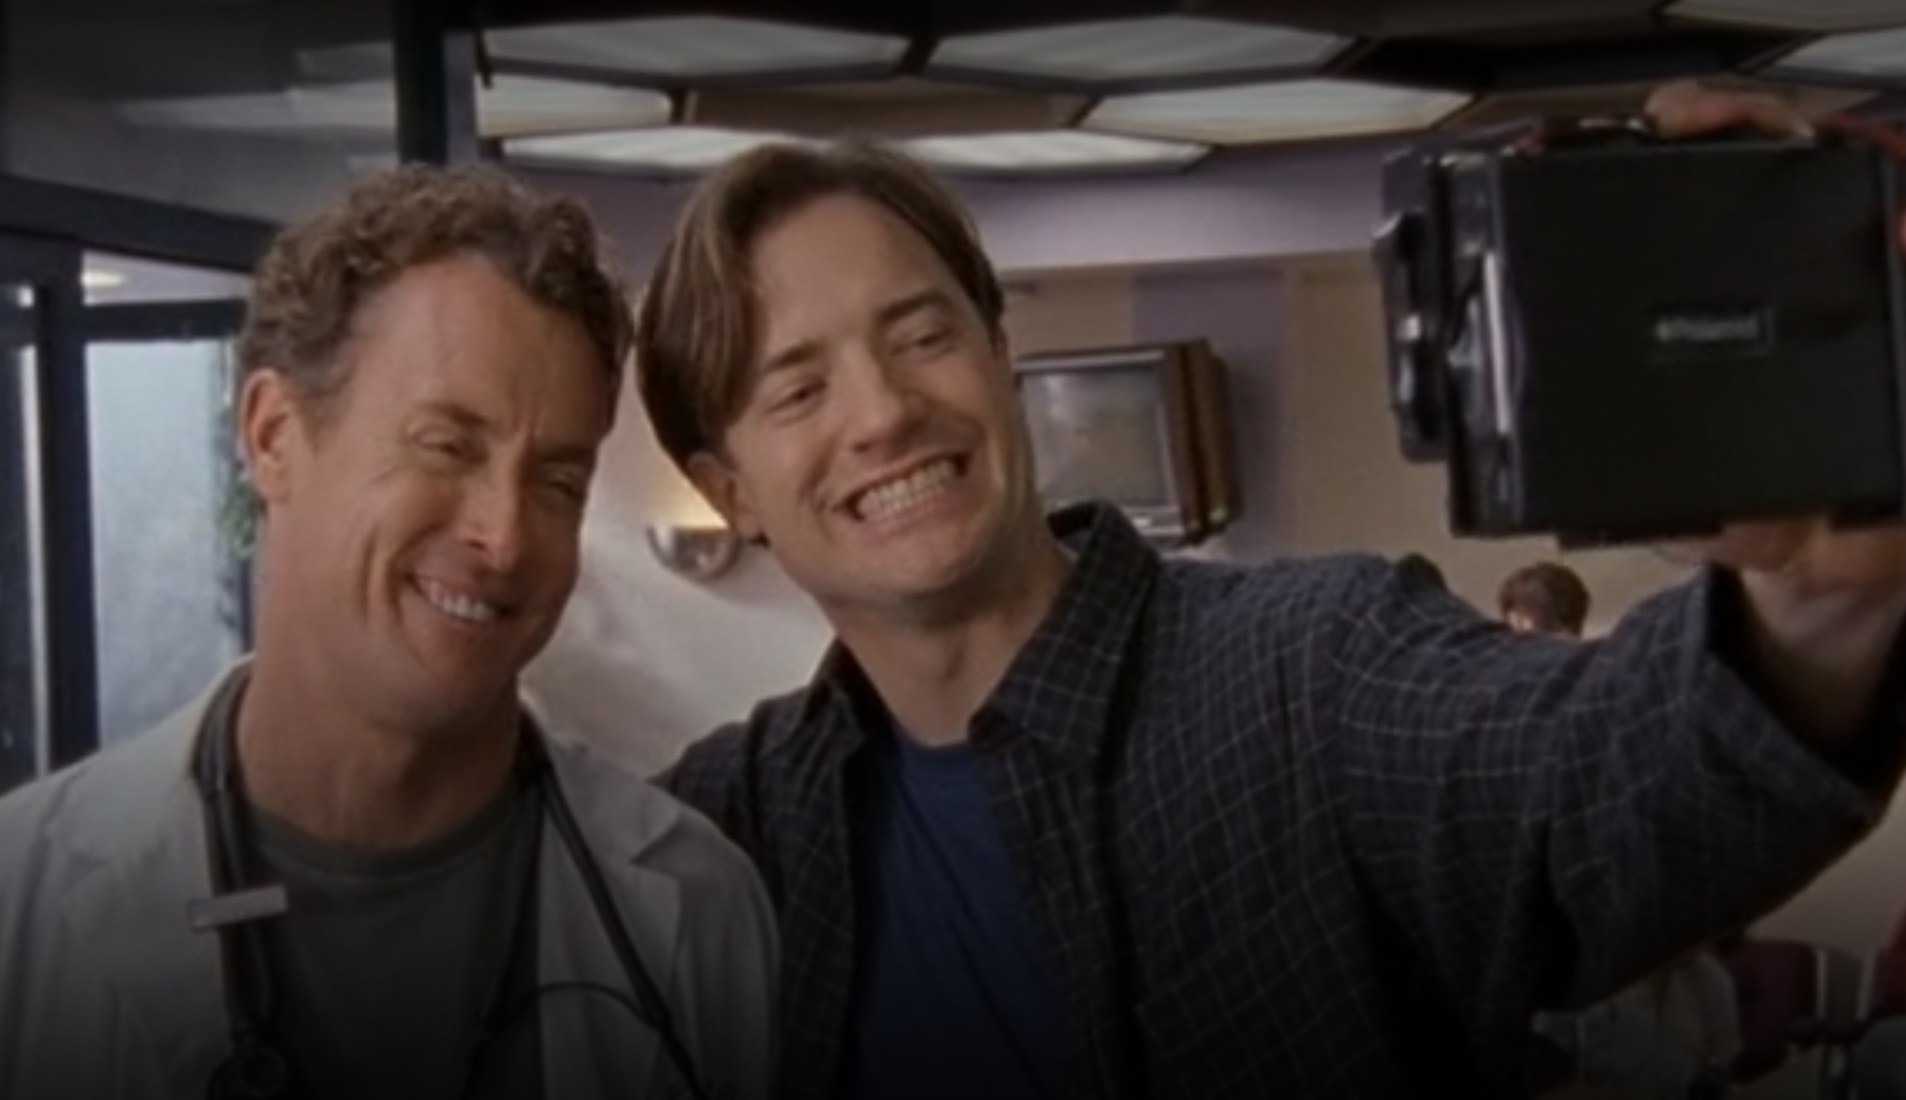 Ben and Dr. Cox taking a selfie in &quot;Scrubs&quot;